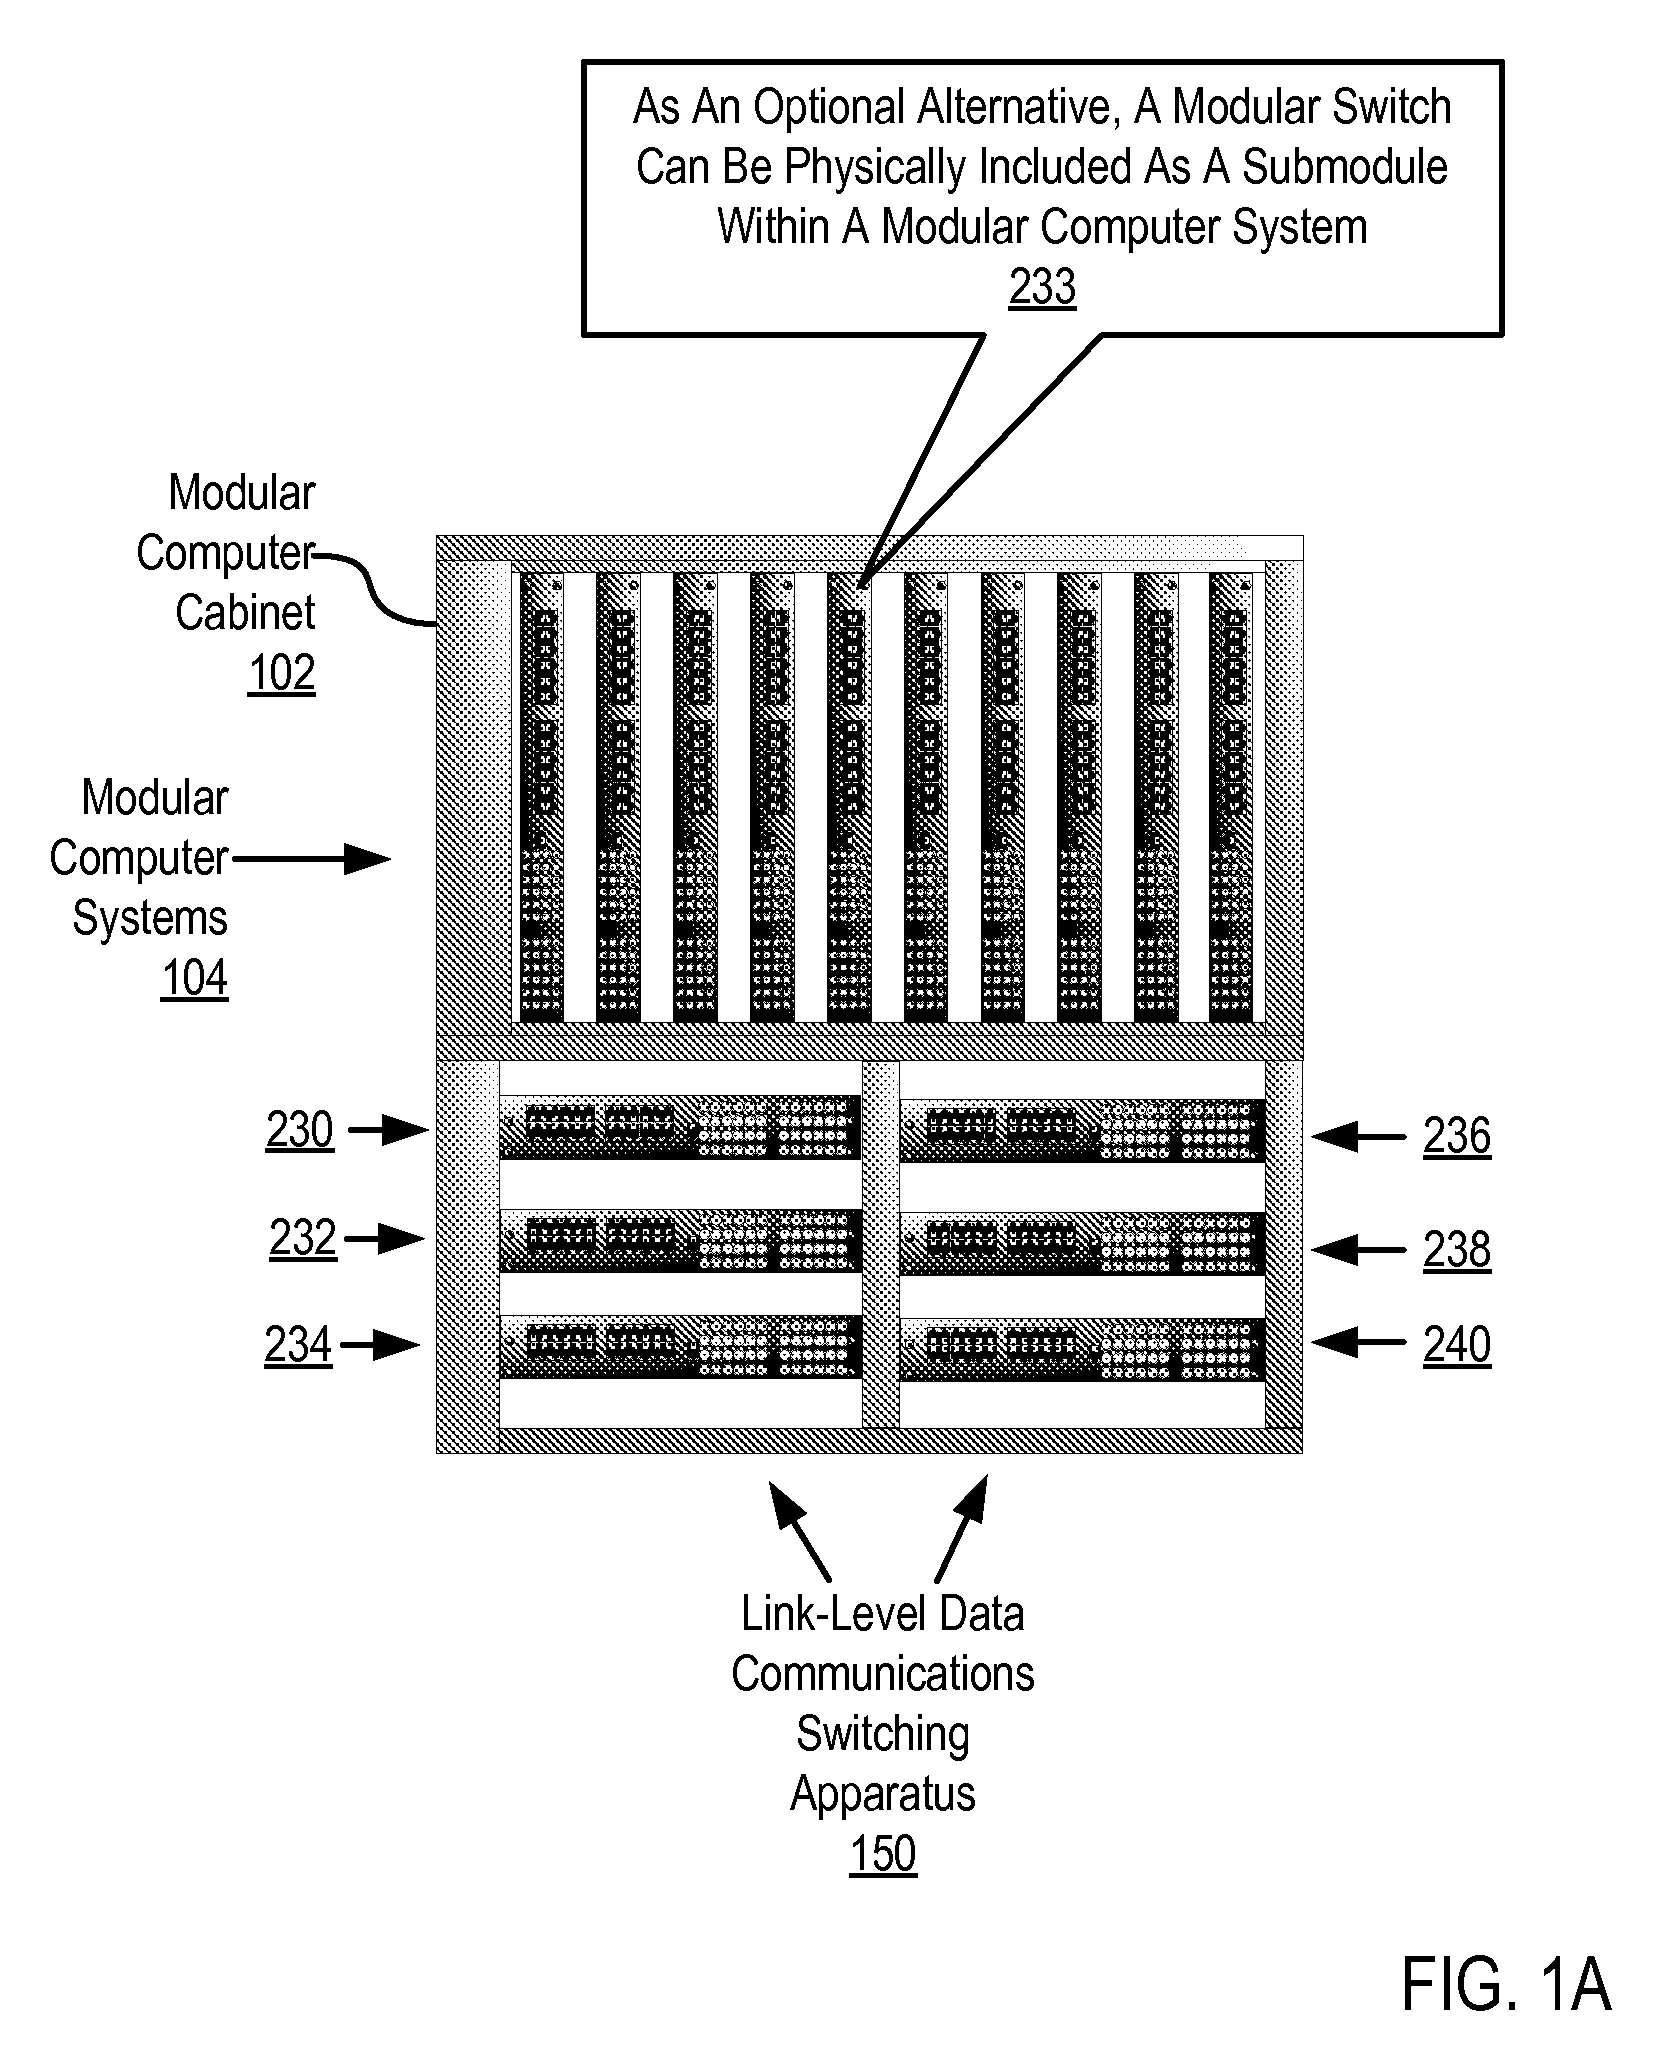 Two-Layer Switch Apparatus Avoiding First Layer Inter-Switch Traffic In Steering Packets Through The Apparatus